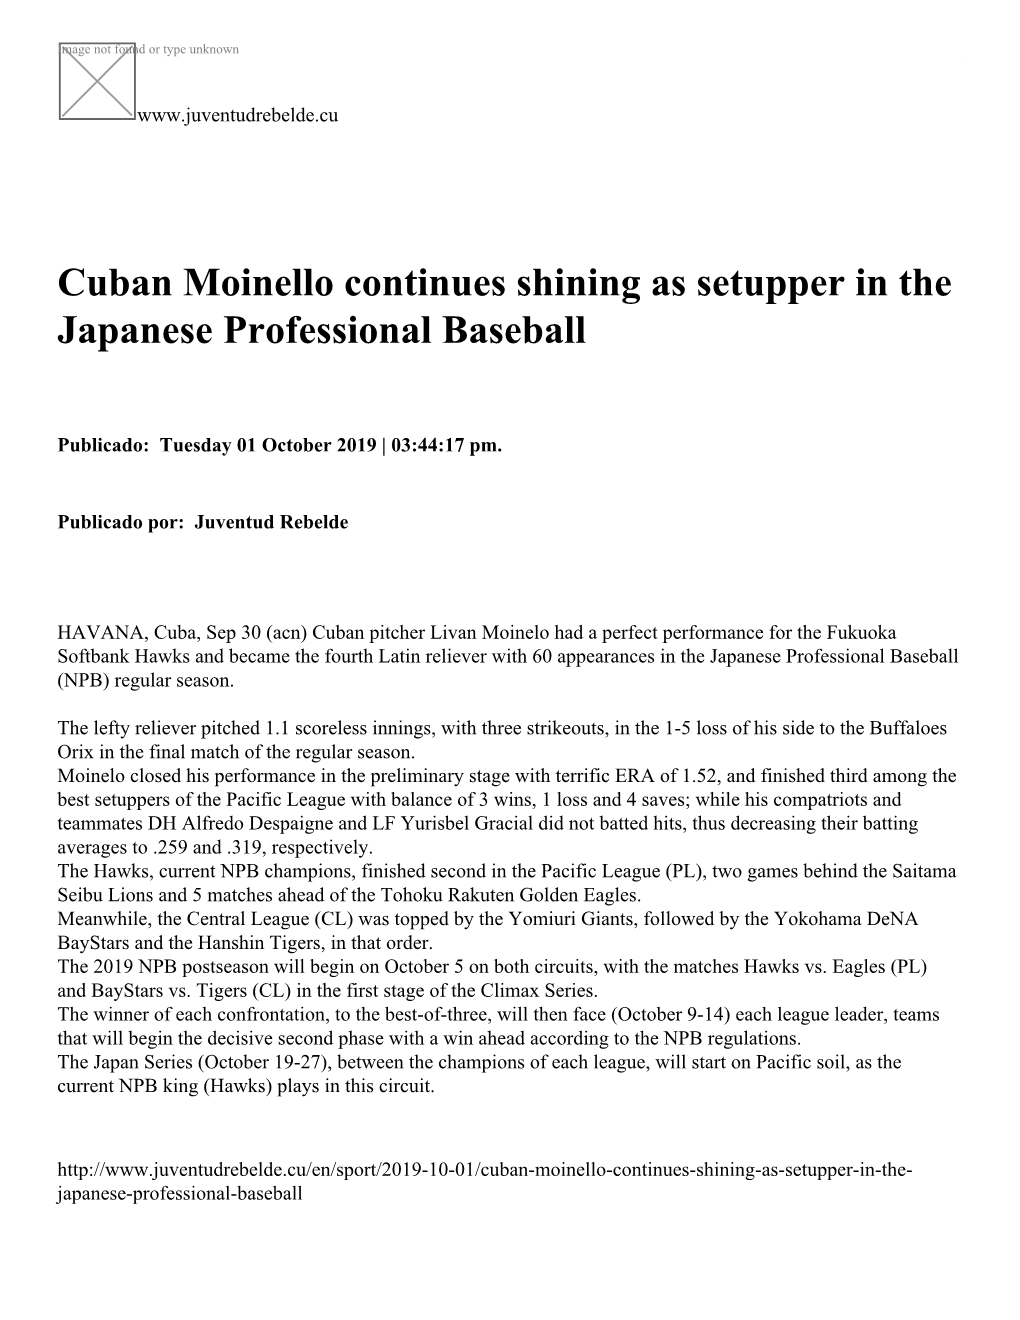 Cuban Moinello Continues Shining As Setupper in the Japanese Professional Baseball